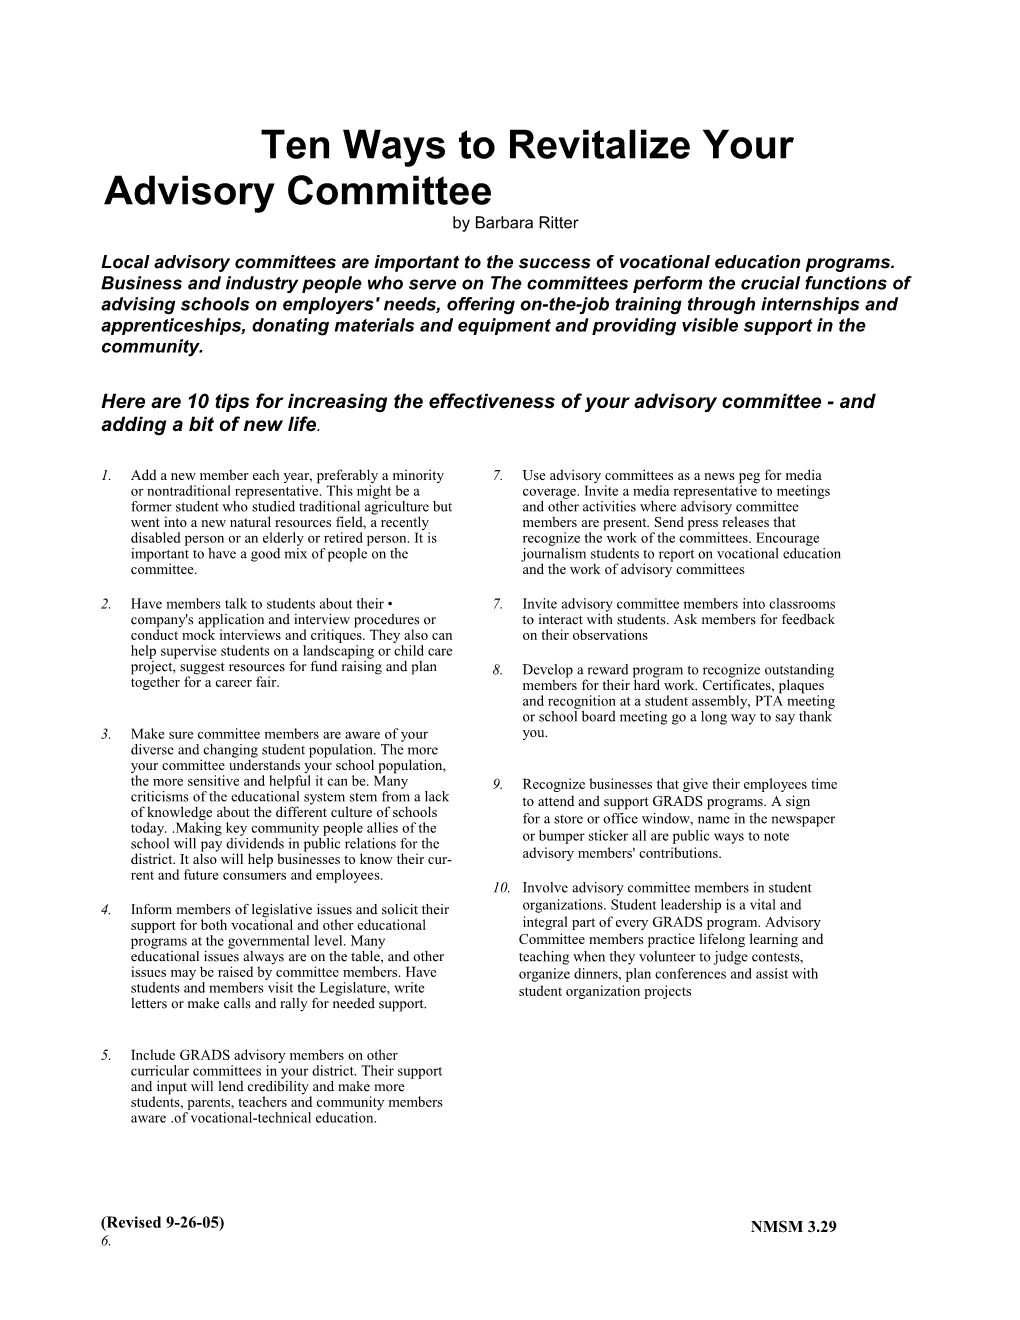 Ten Ways to Revitalize Your Advisory Committee